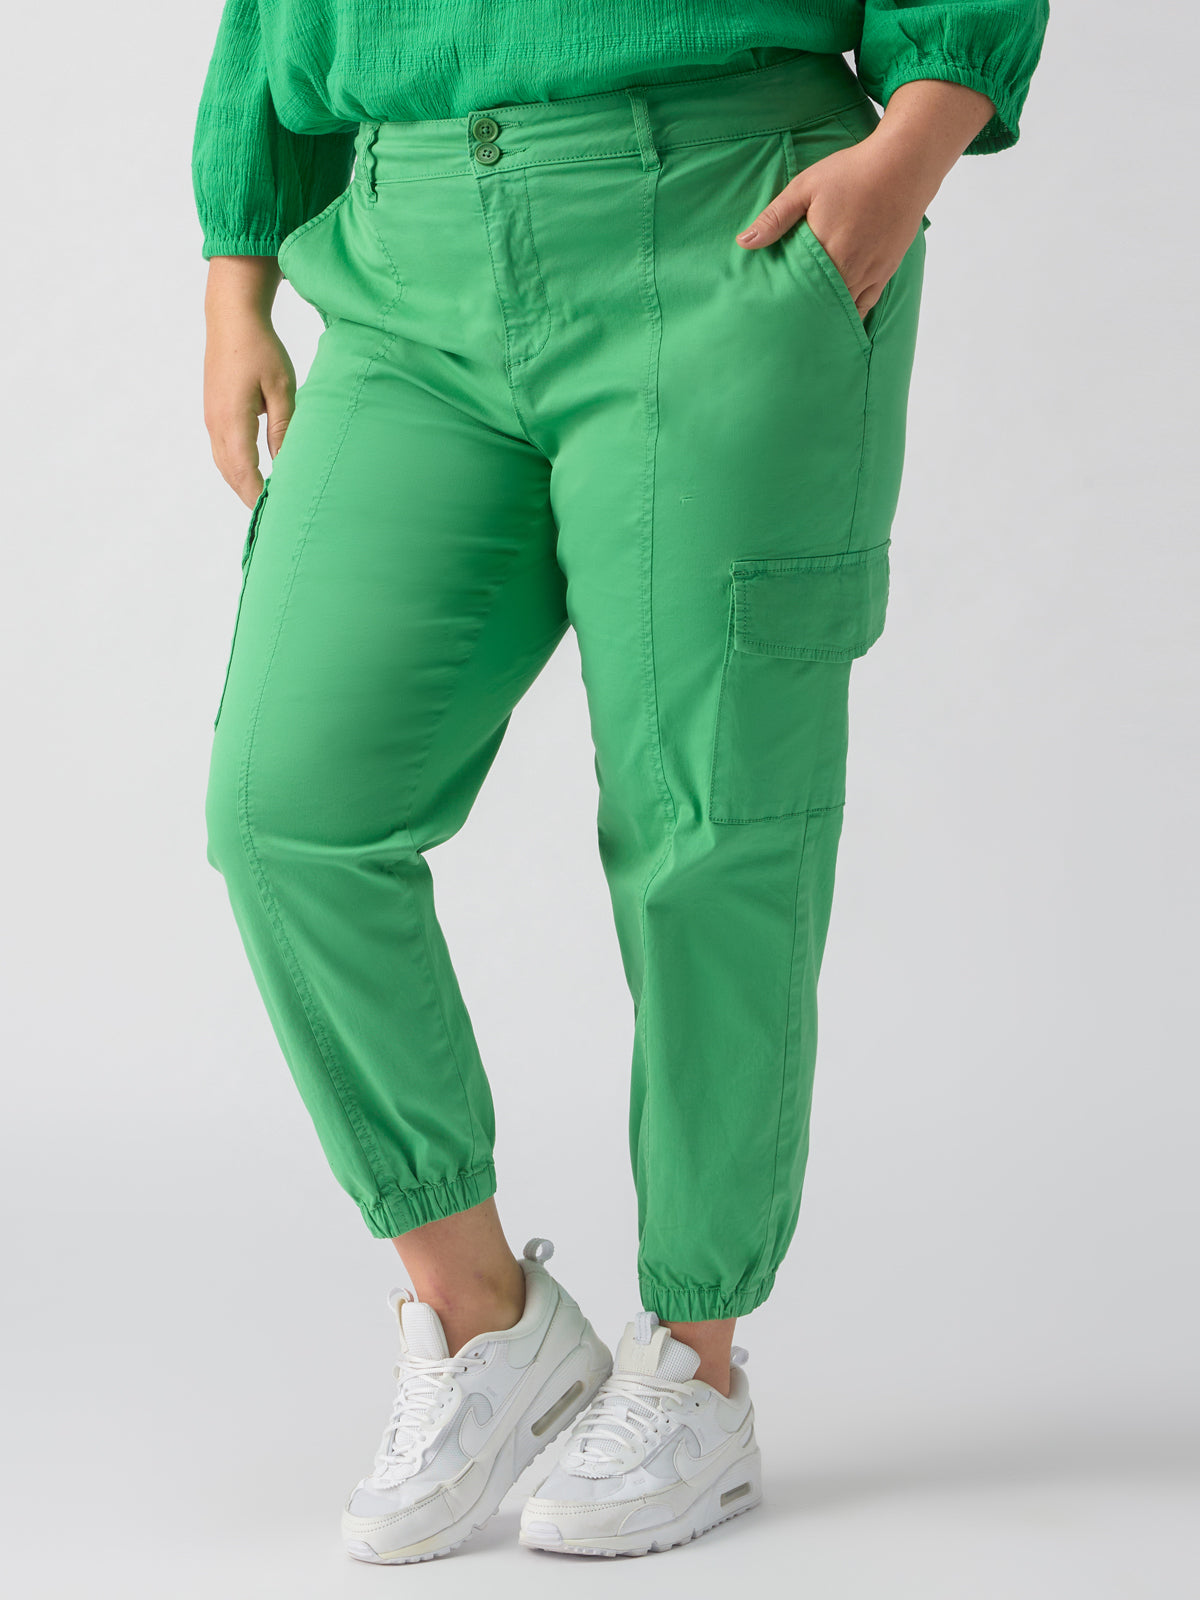 Rebel Standard Rise Pant Green Goddess Inclusive Collection